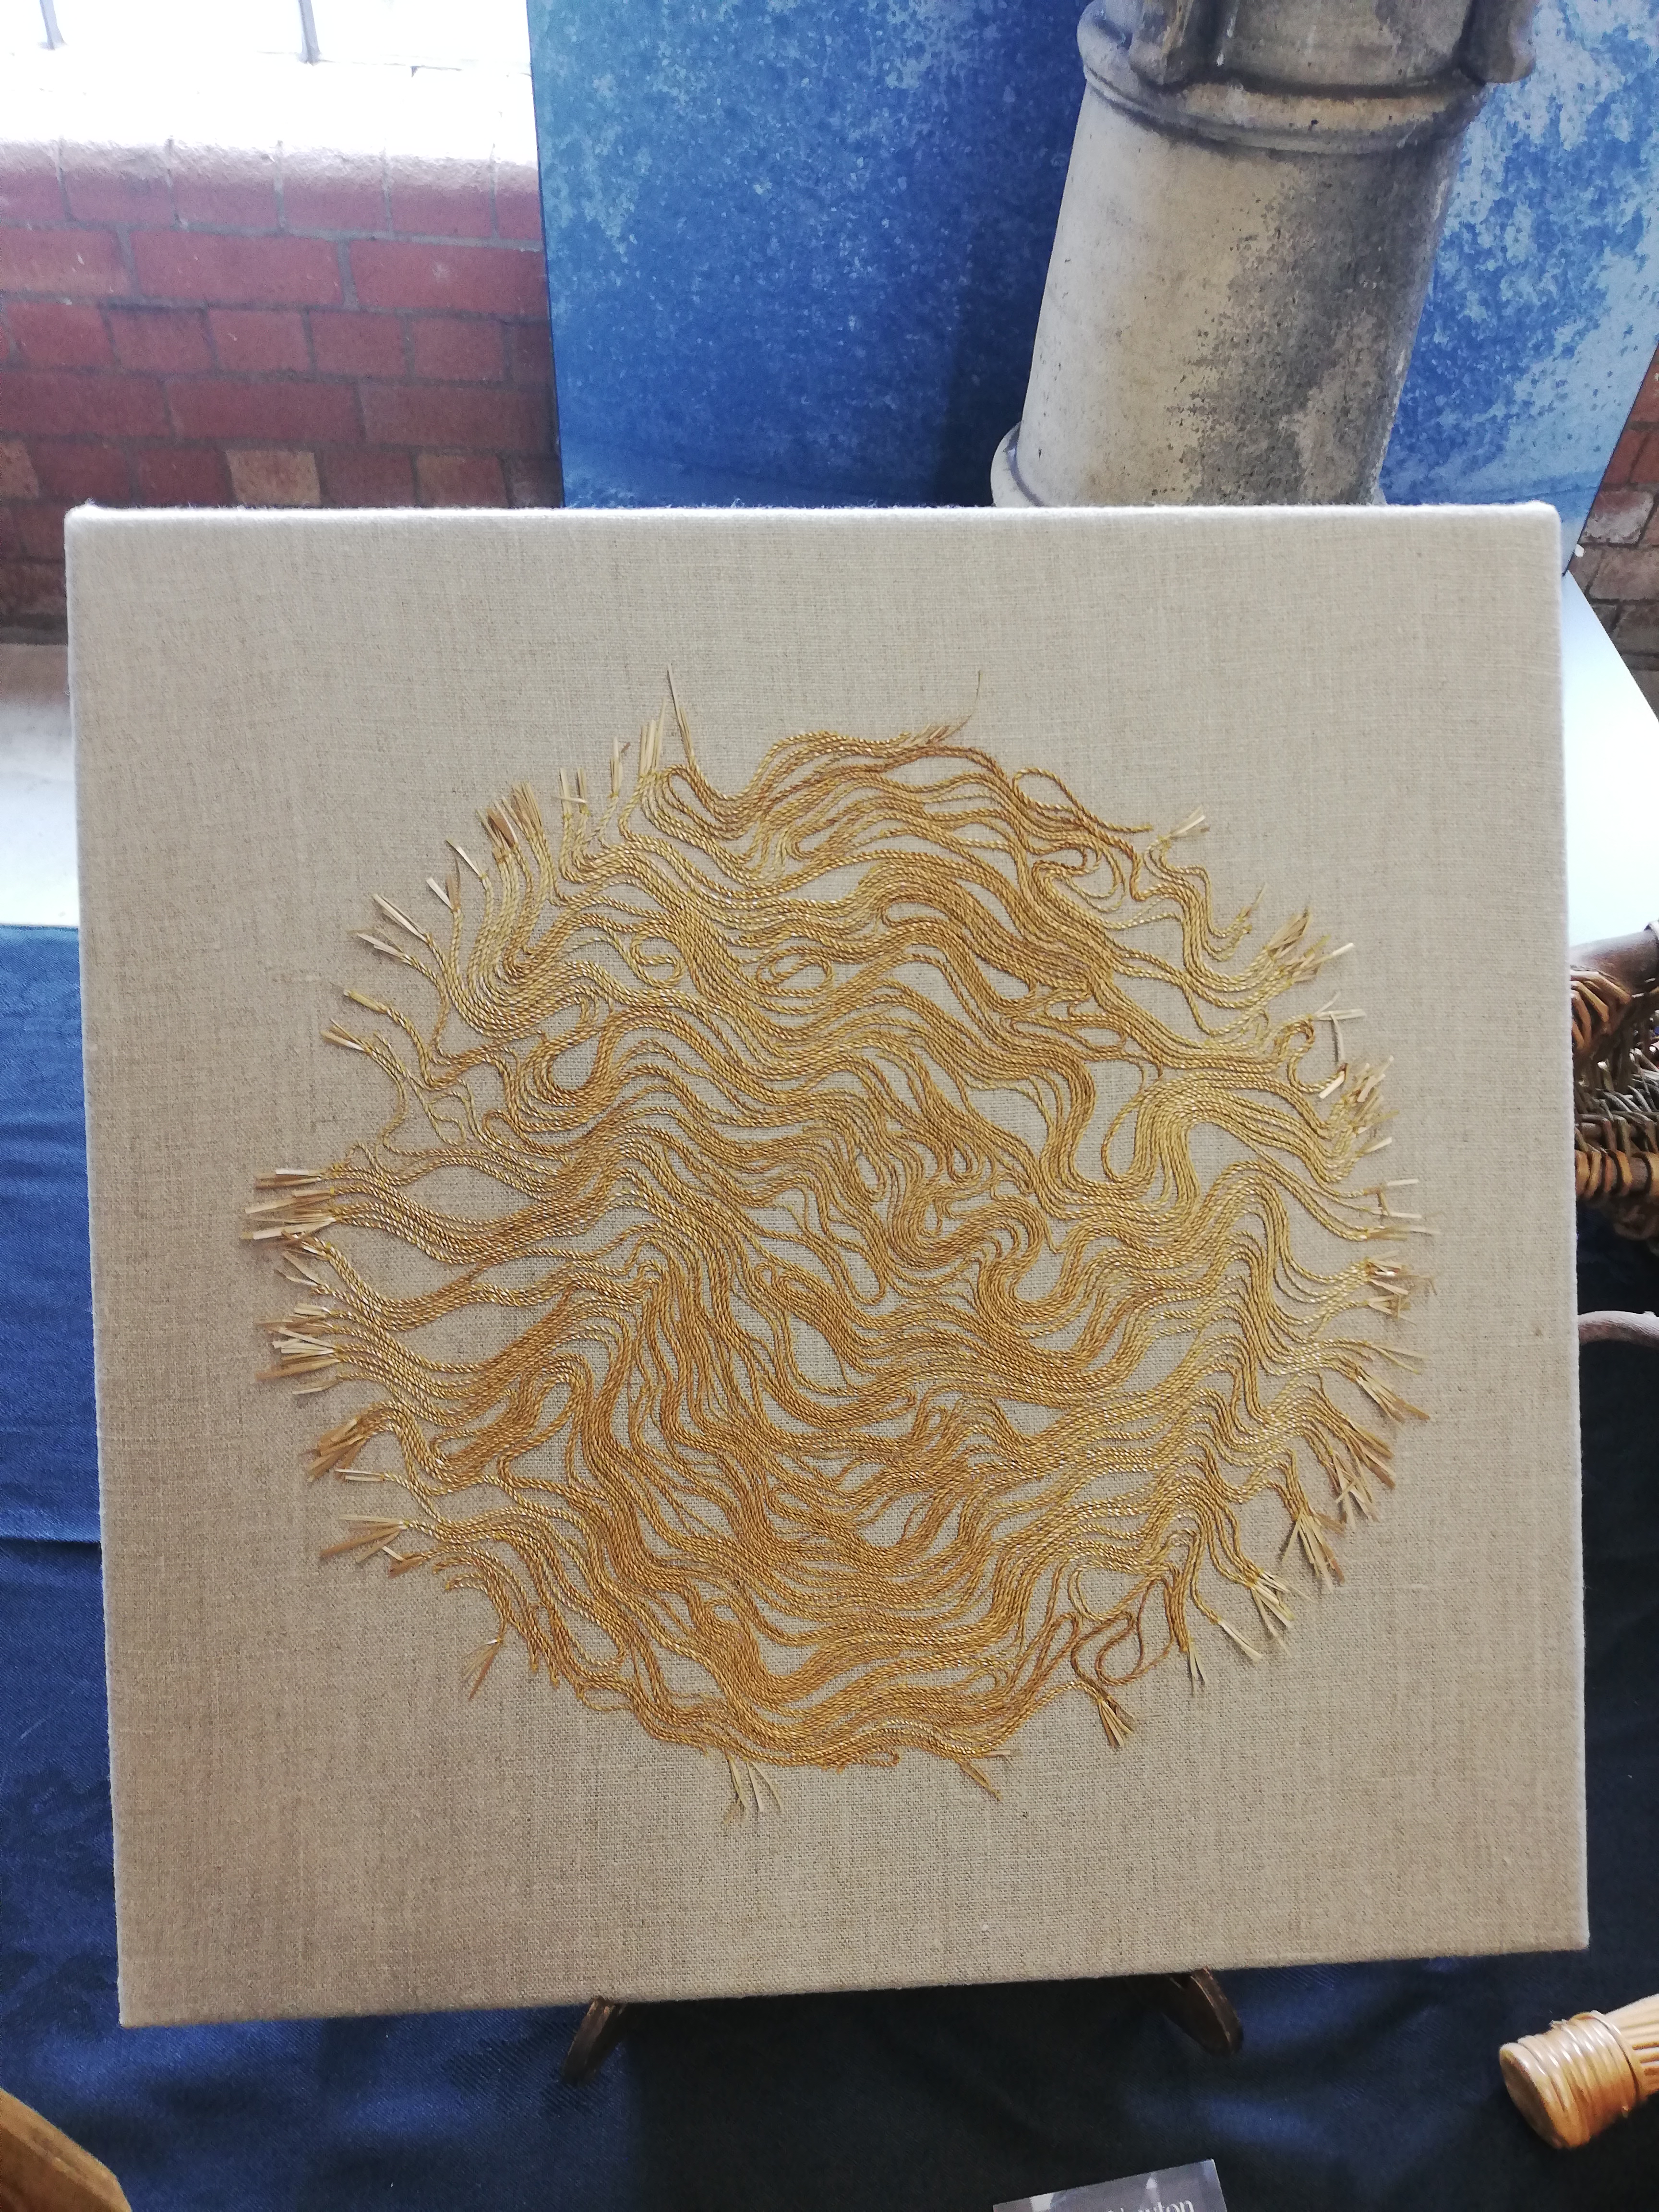 Abstract goldwork style embroidery, but done instead with straw